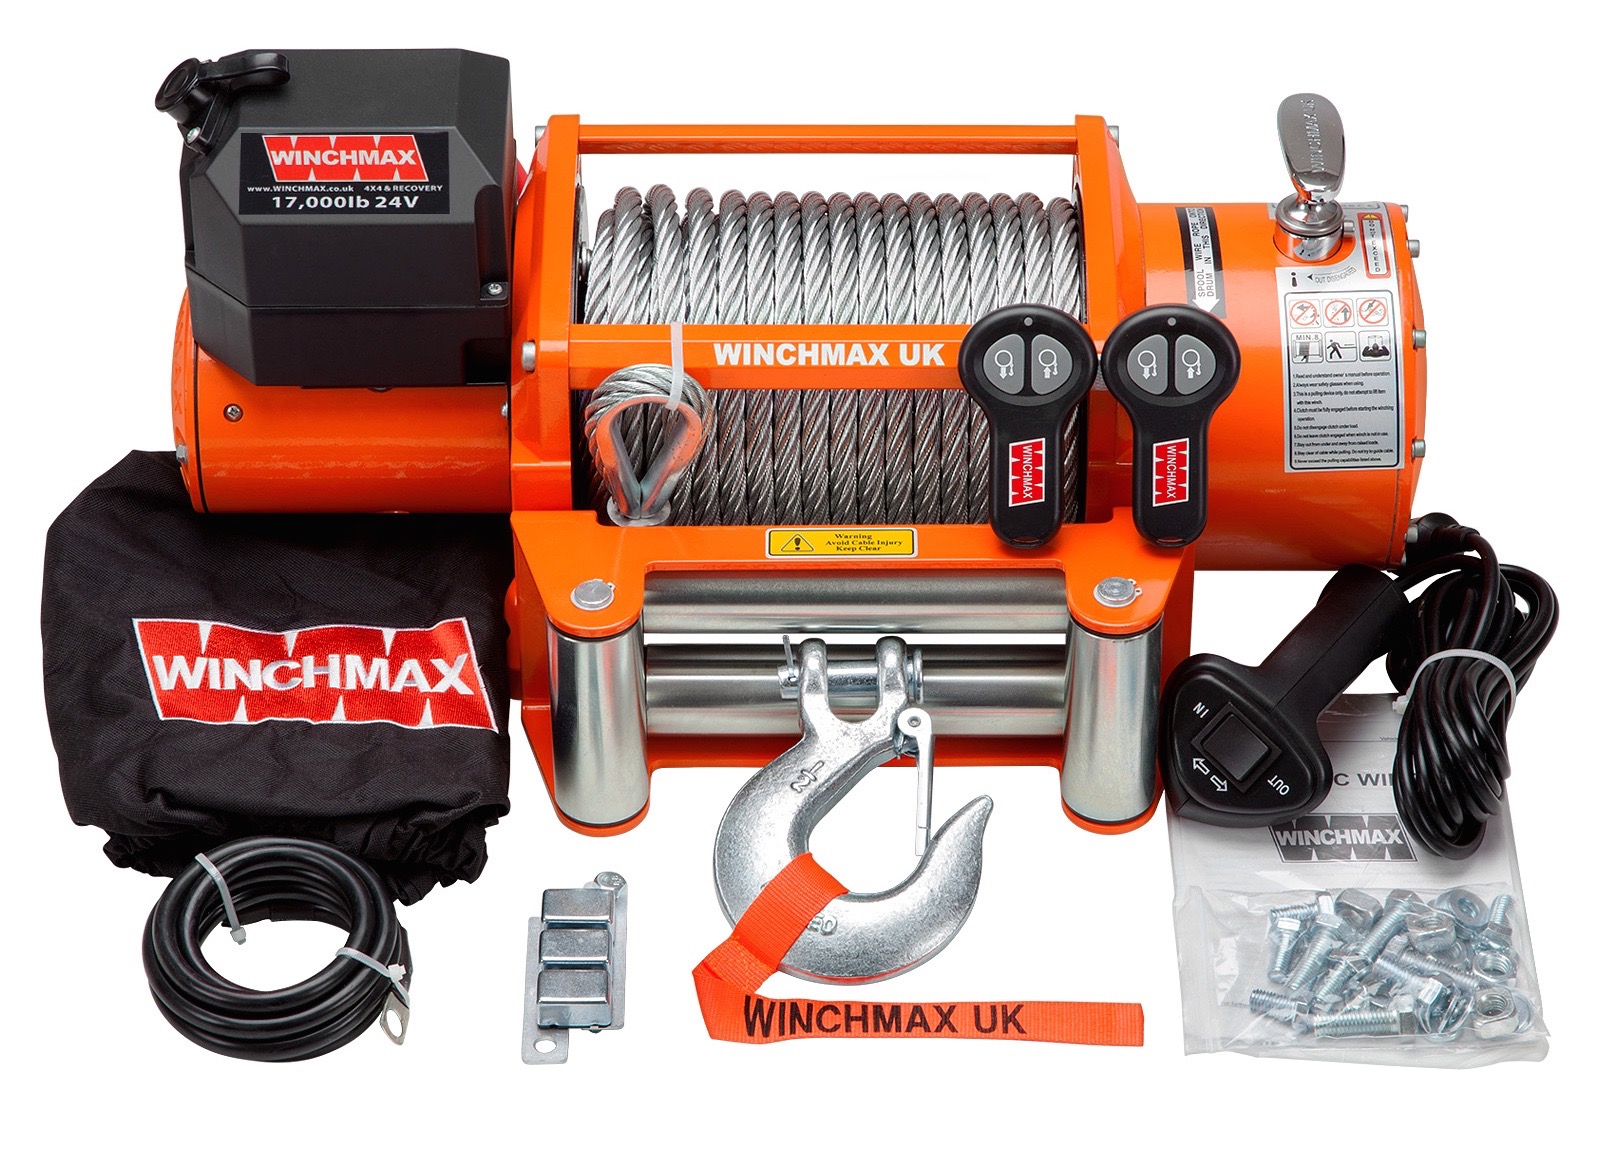 WINCHMAX 17000LB 12V ELECTRIC STEEL CABLE WINCH WITH WIRELESS REMOTES